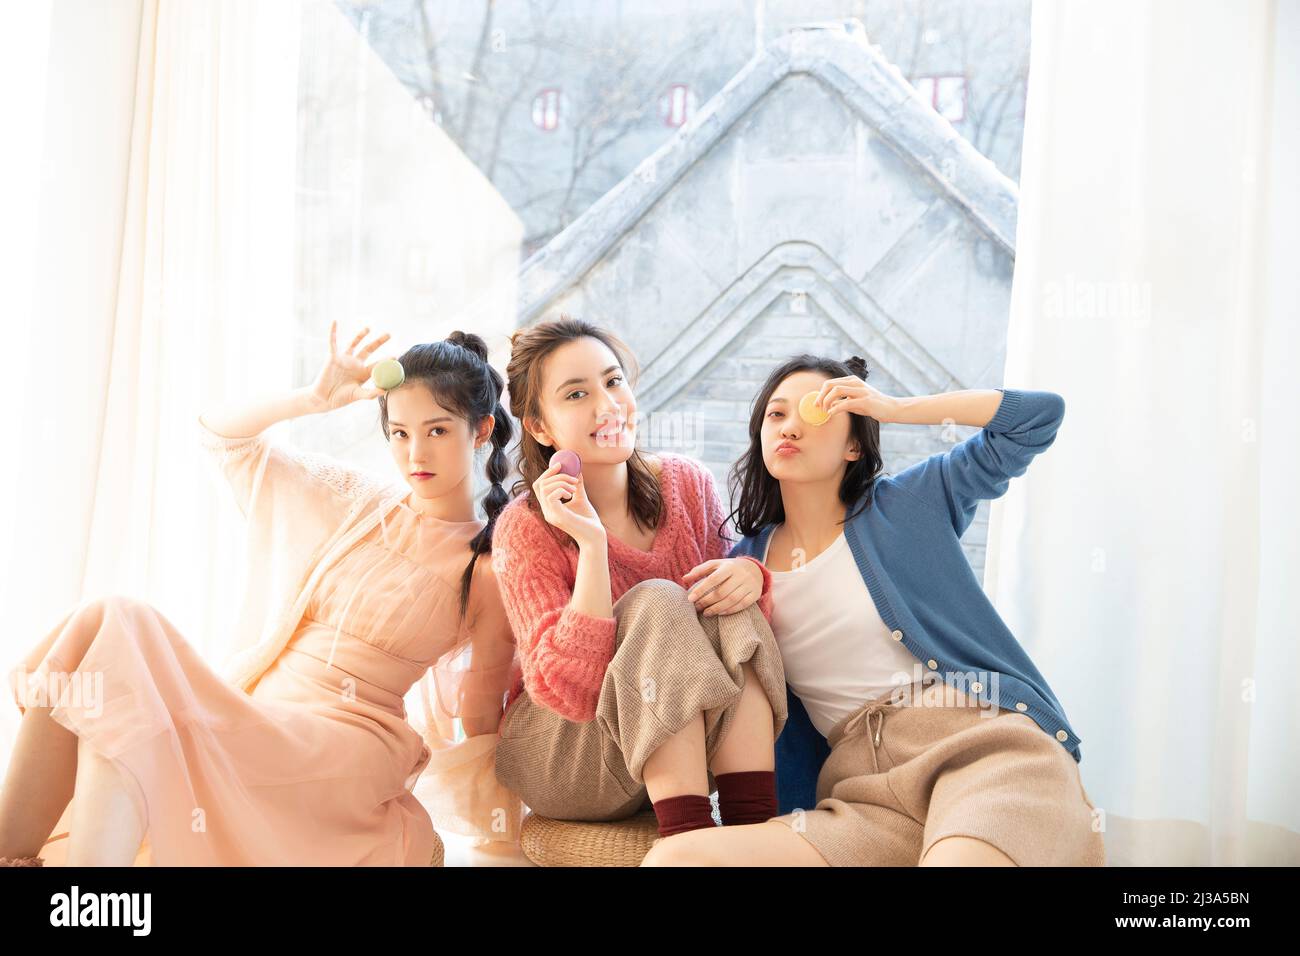 The leisure time of beautiful young fashionable ladies in China - stock photo Stock Photo